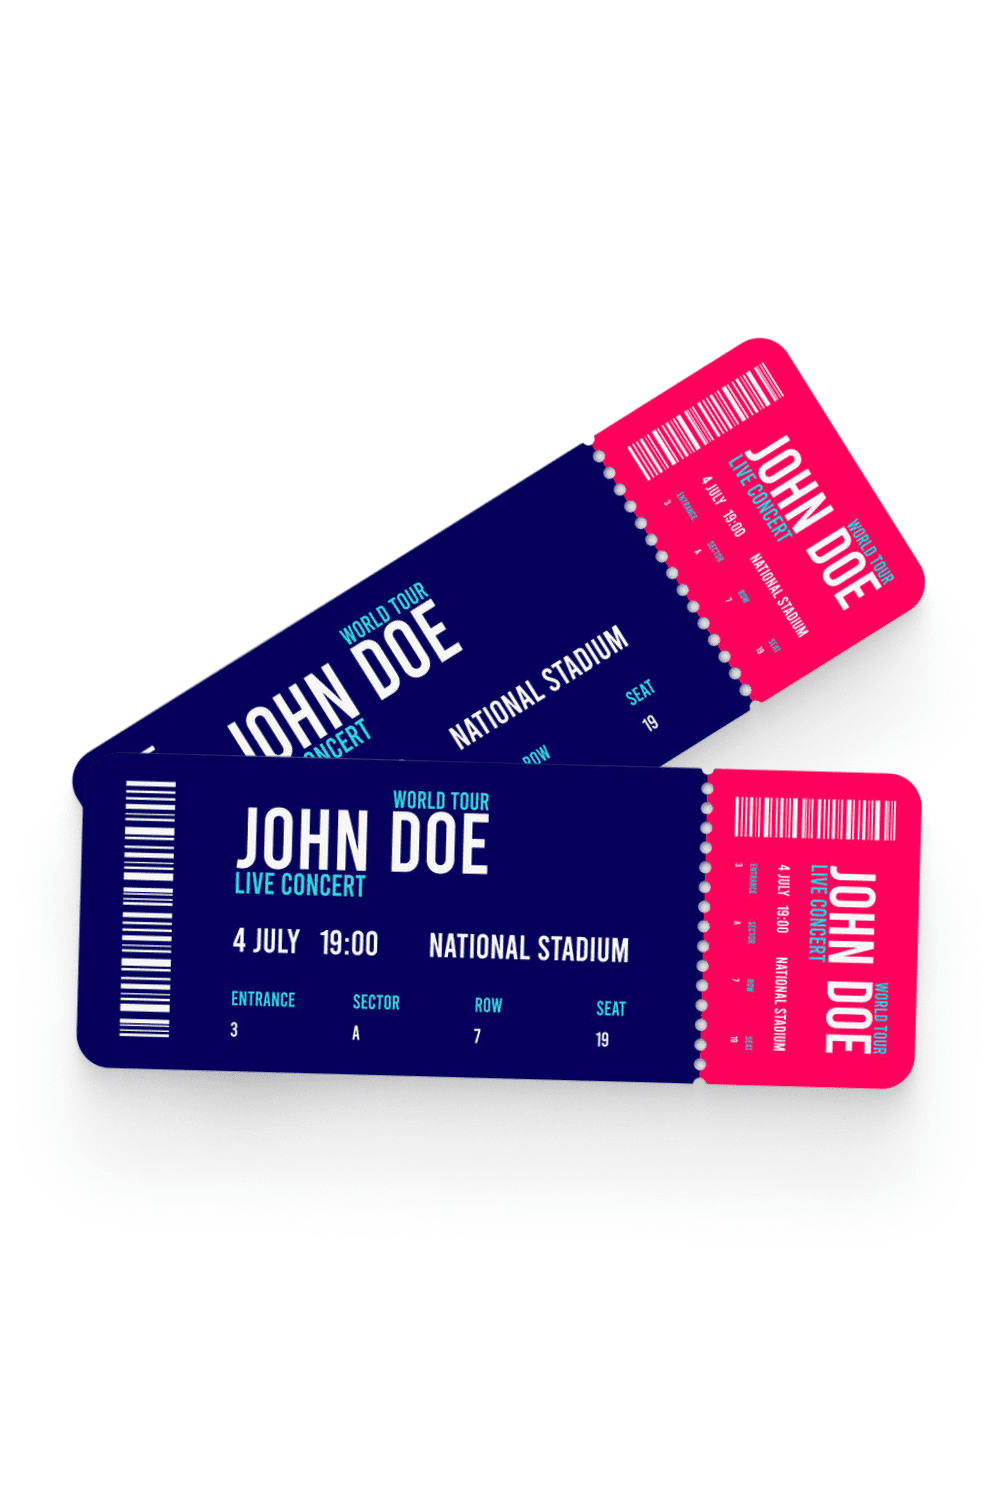 Two tickets in pink and blue colors.